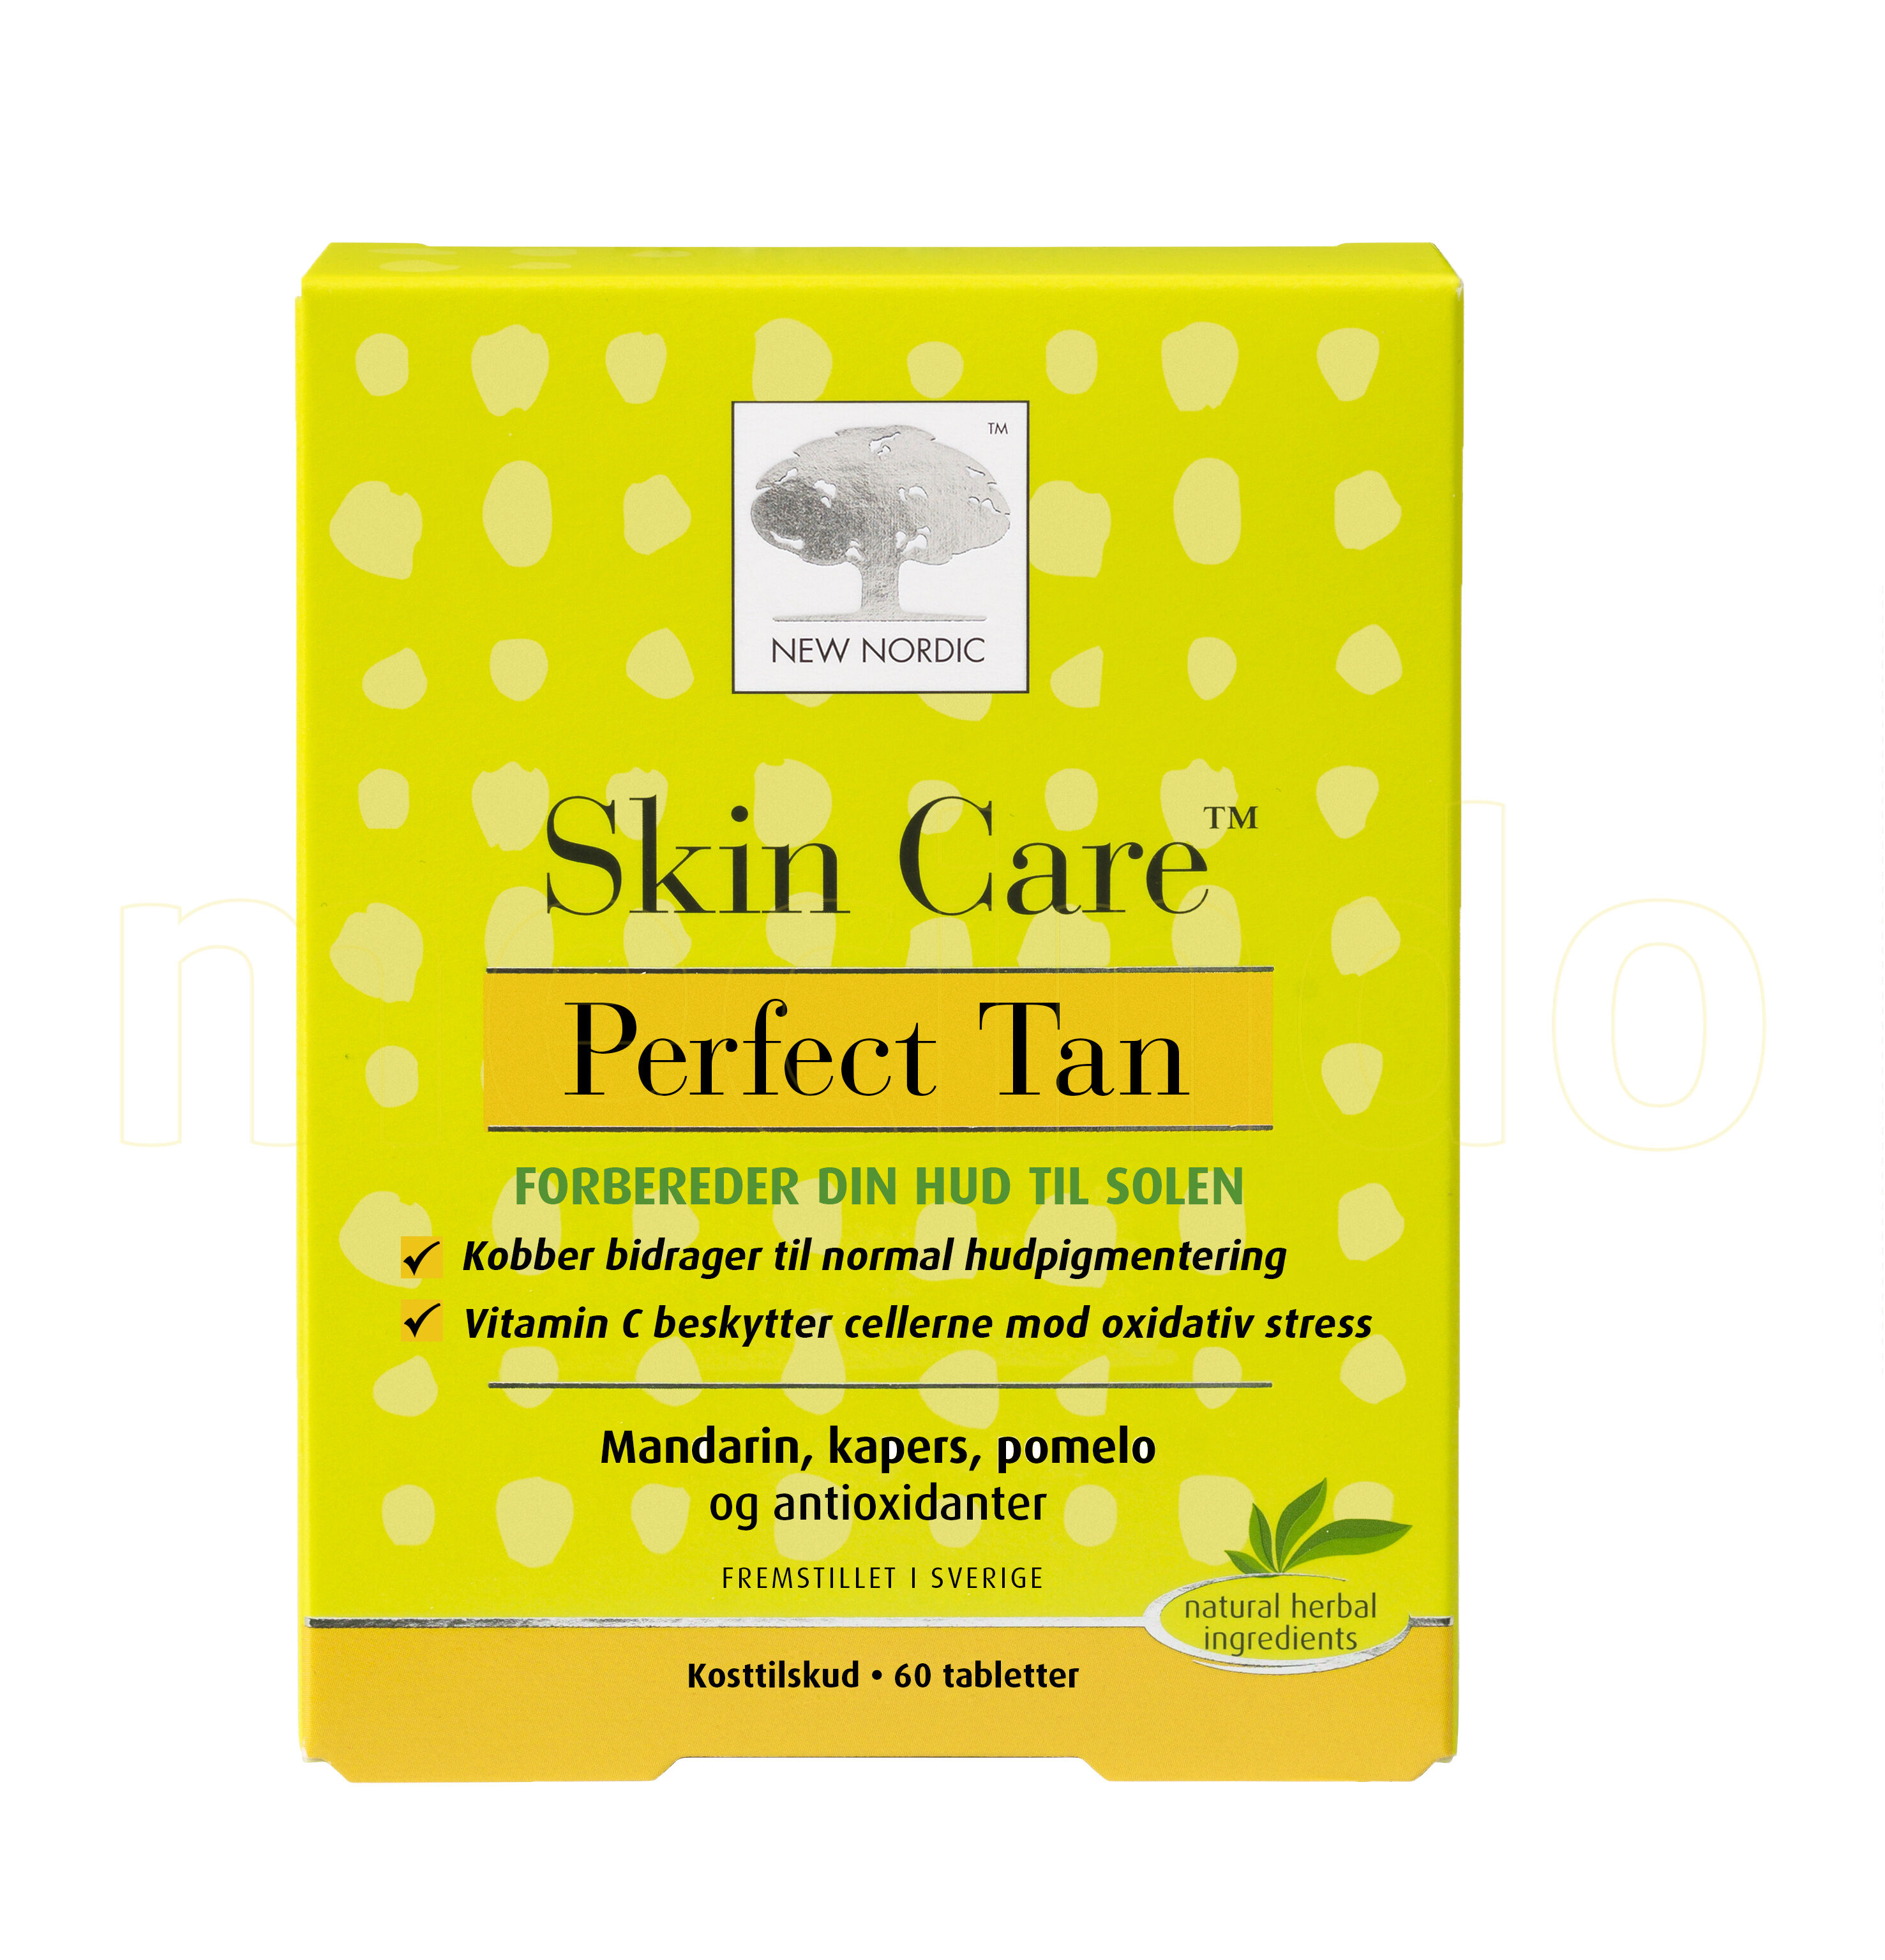 New Nordic Skin Care Perfect Tan - 60 Tabletter